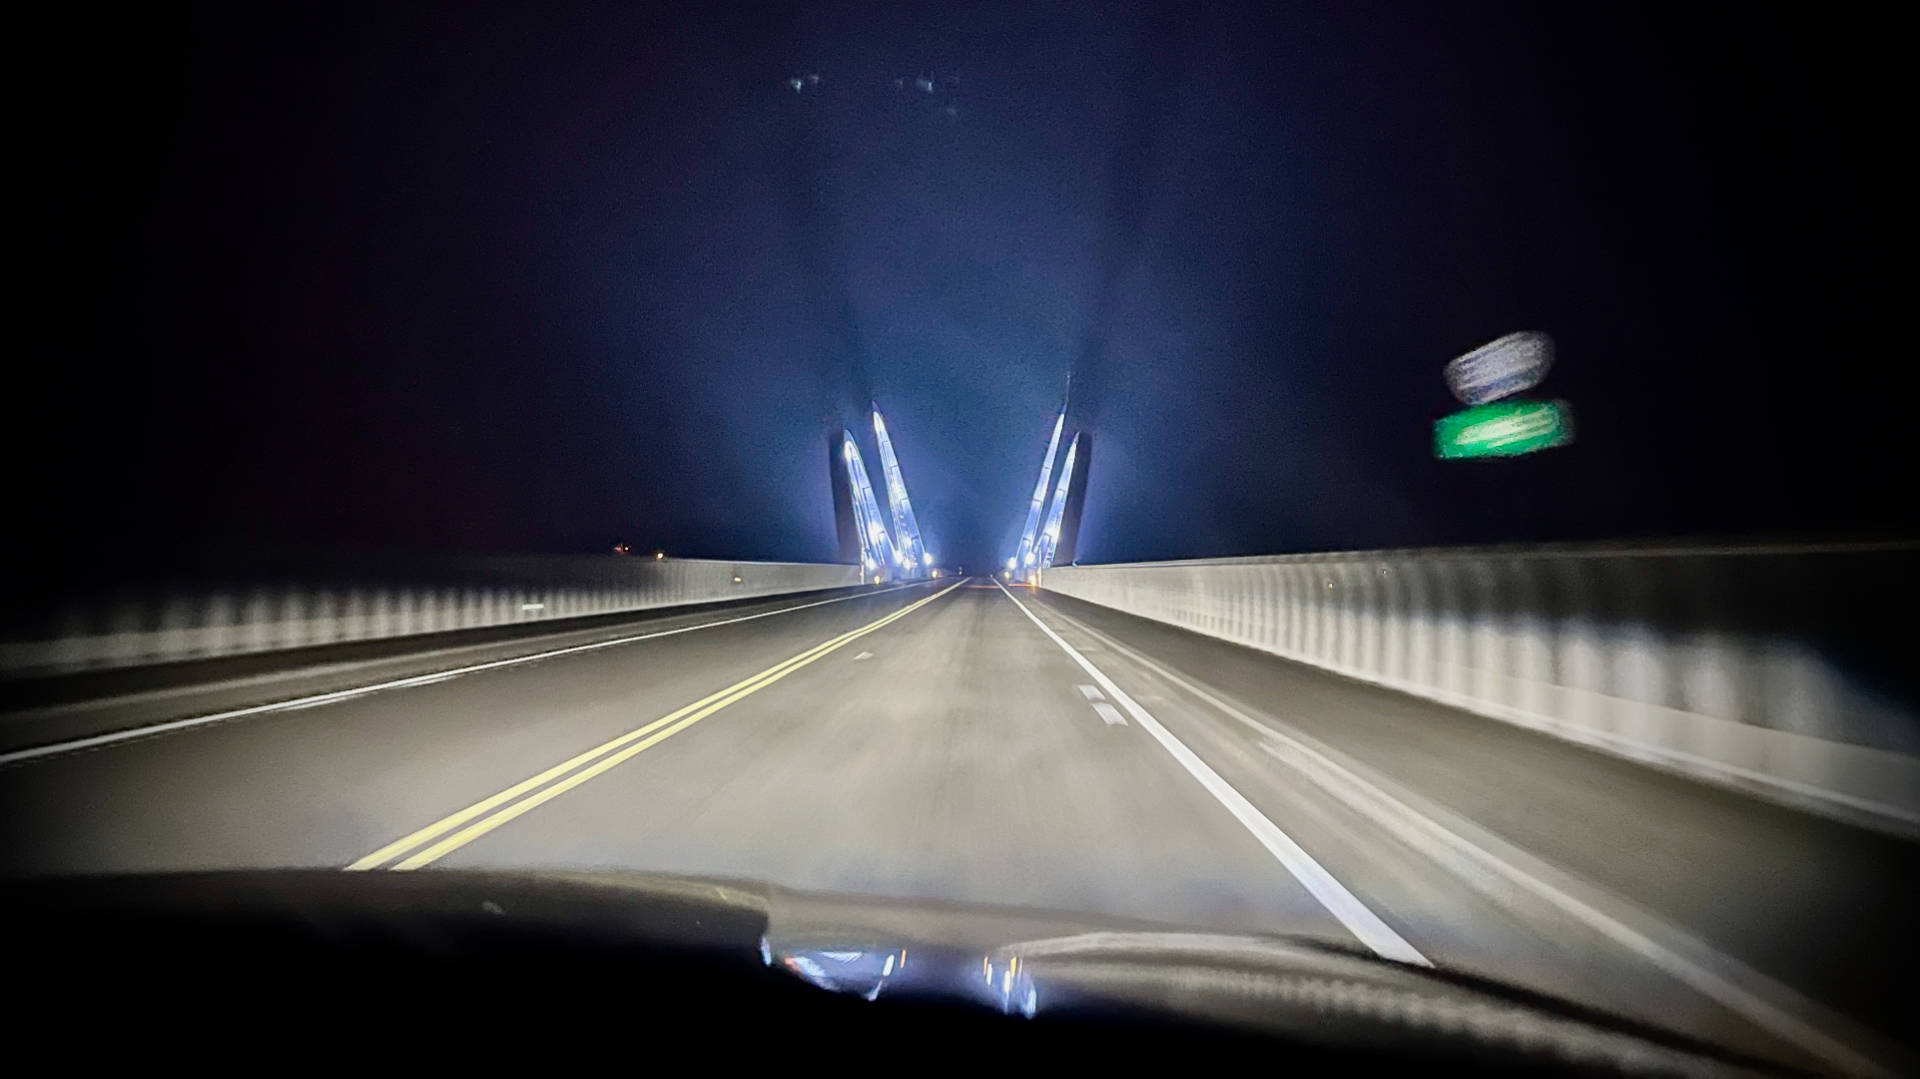 Photo taken from the front seat of a moving car, showing a long and empty two-lane bridge, with illuminated arches in the distance.